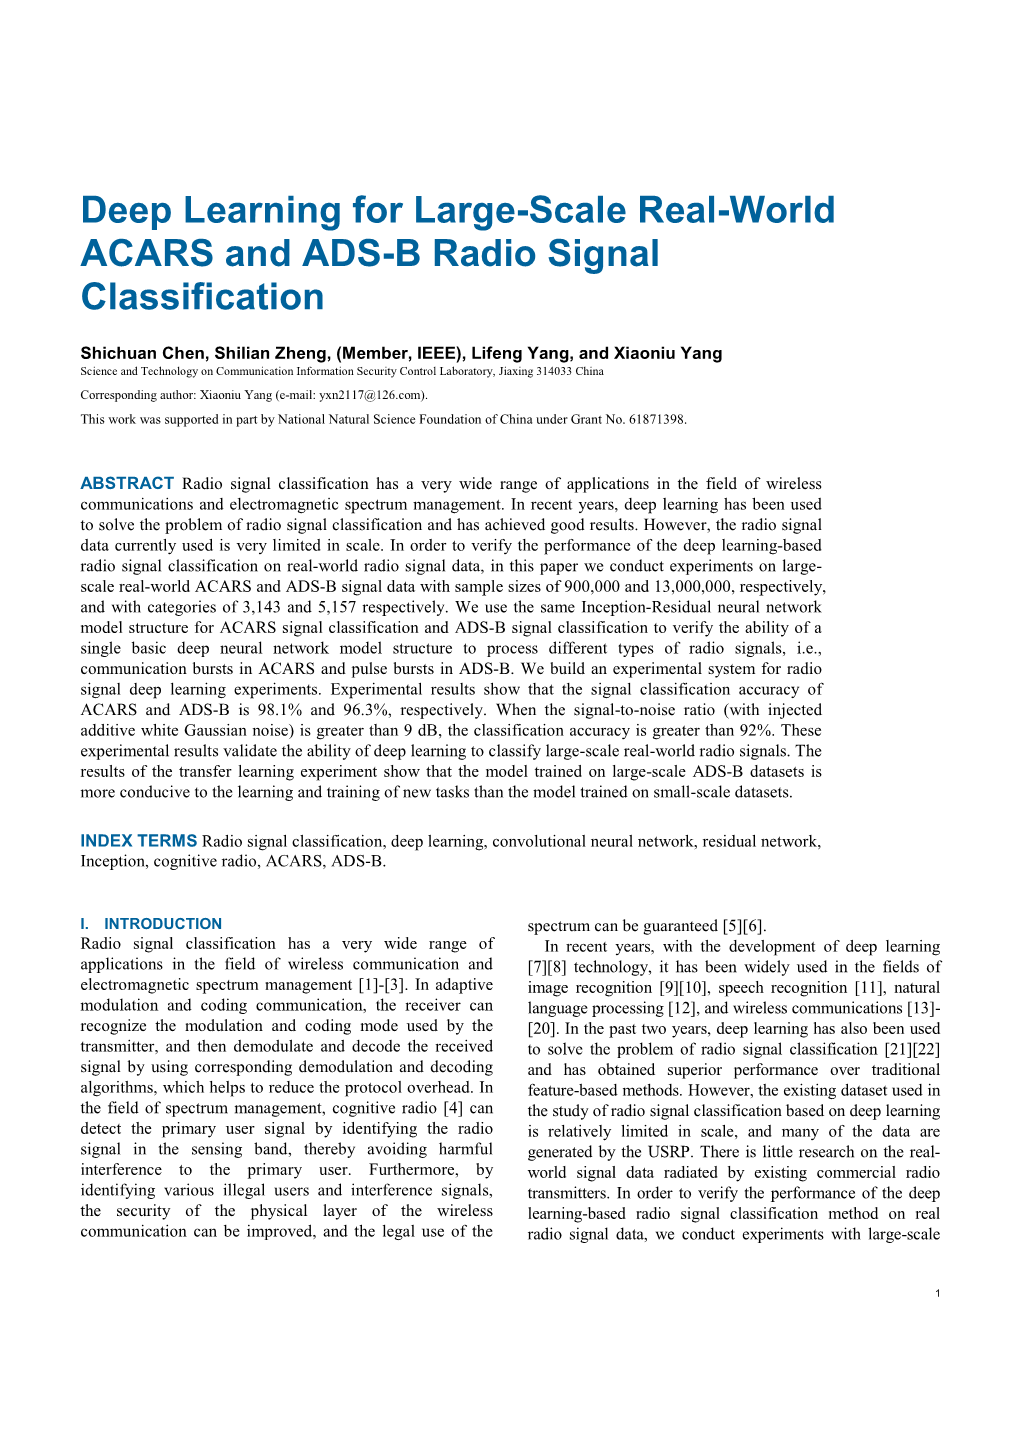 Deep Learning for Large-Scale Real-World ACARS and ADS-B Radio Signal Classification